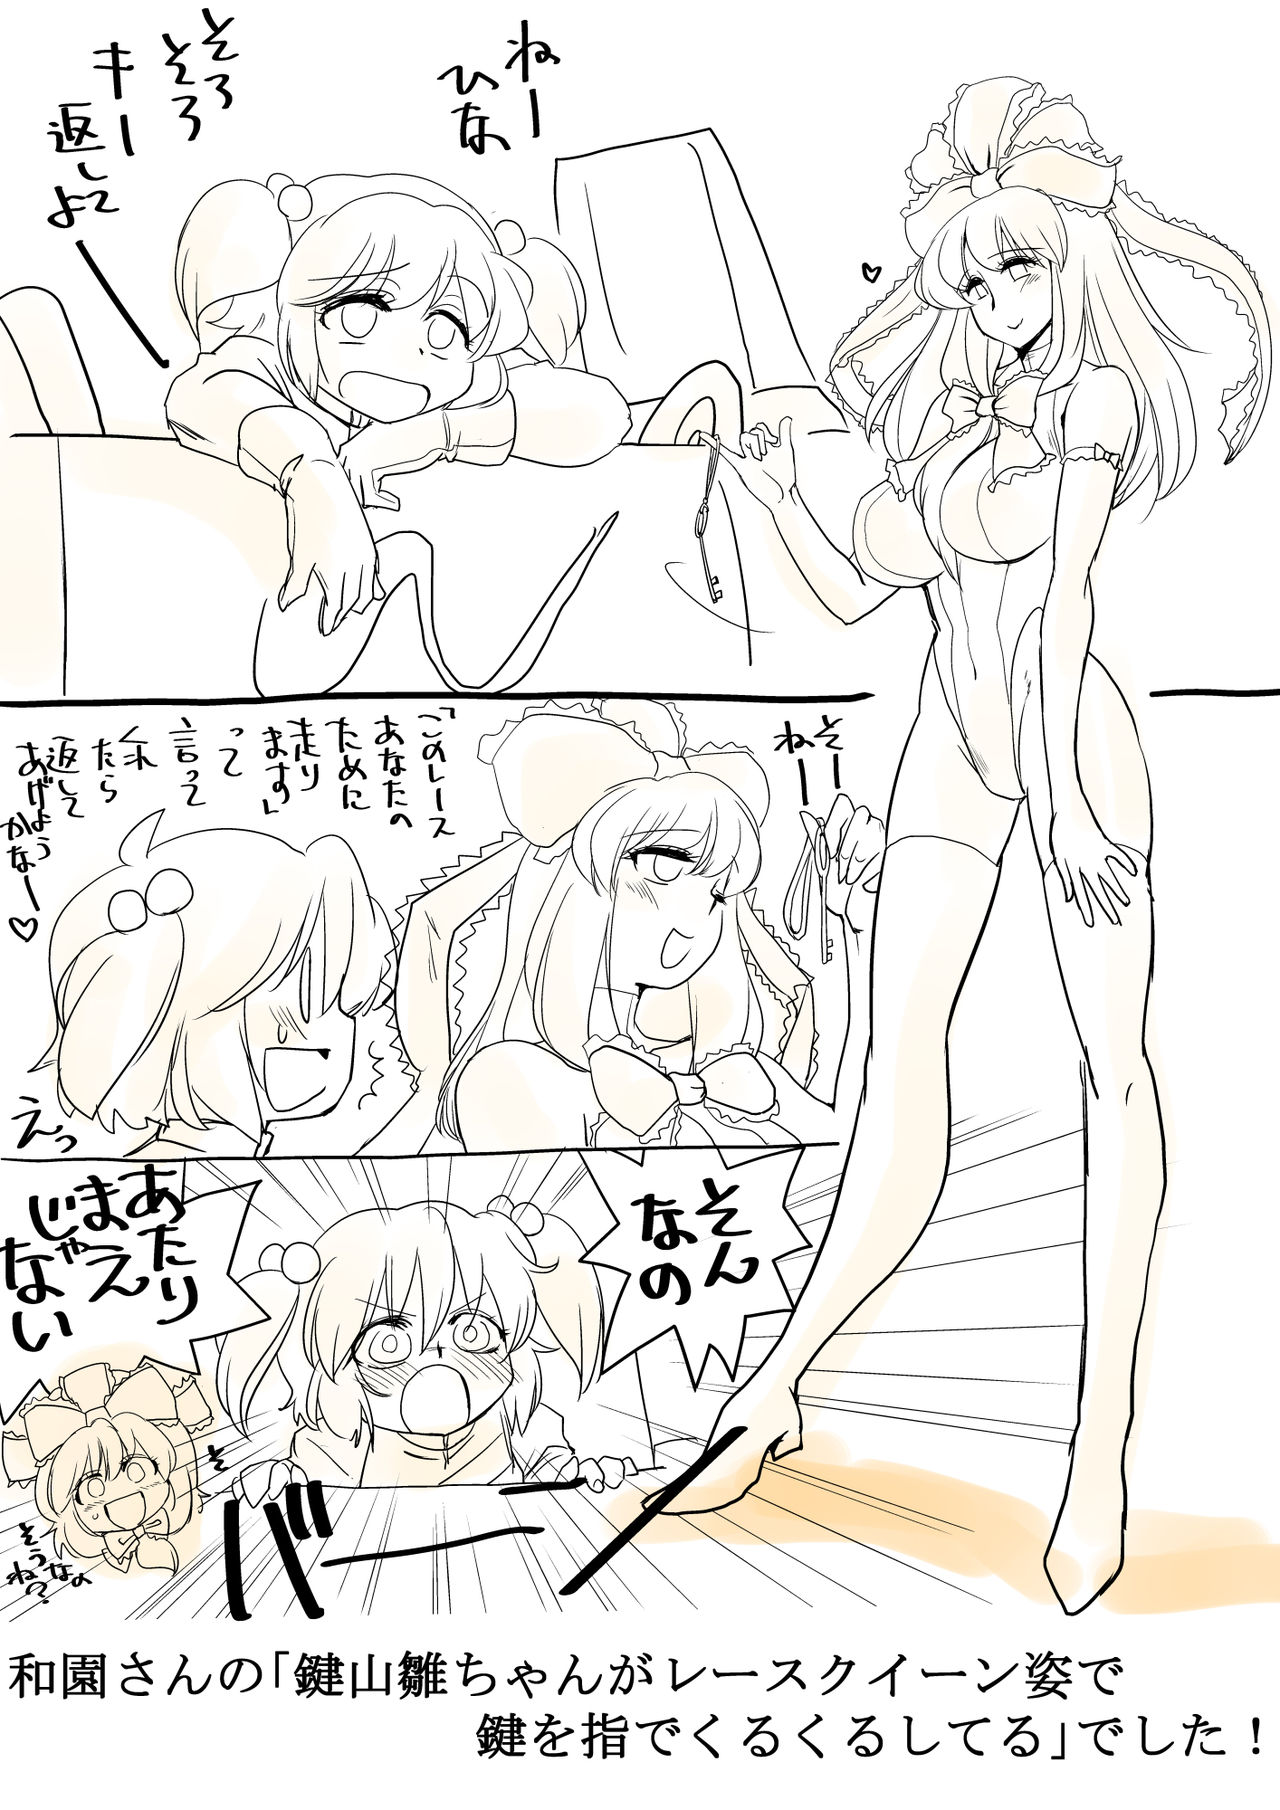 [Danna] Touhou Request CG Shuu Sono 2 (Touhou Project) page 8 full